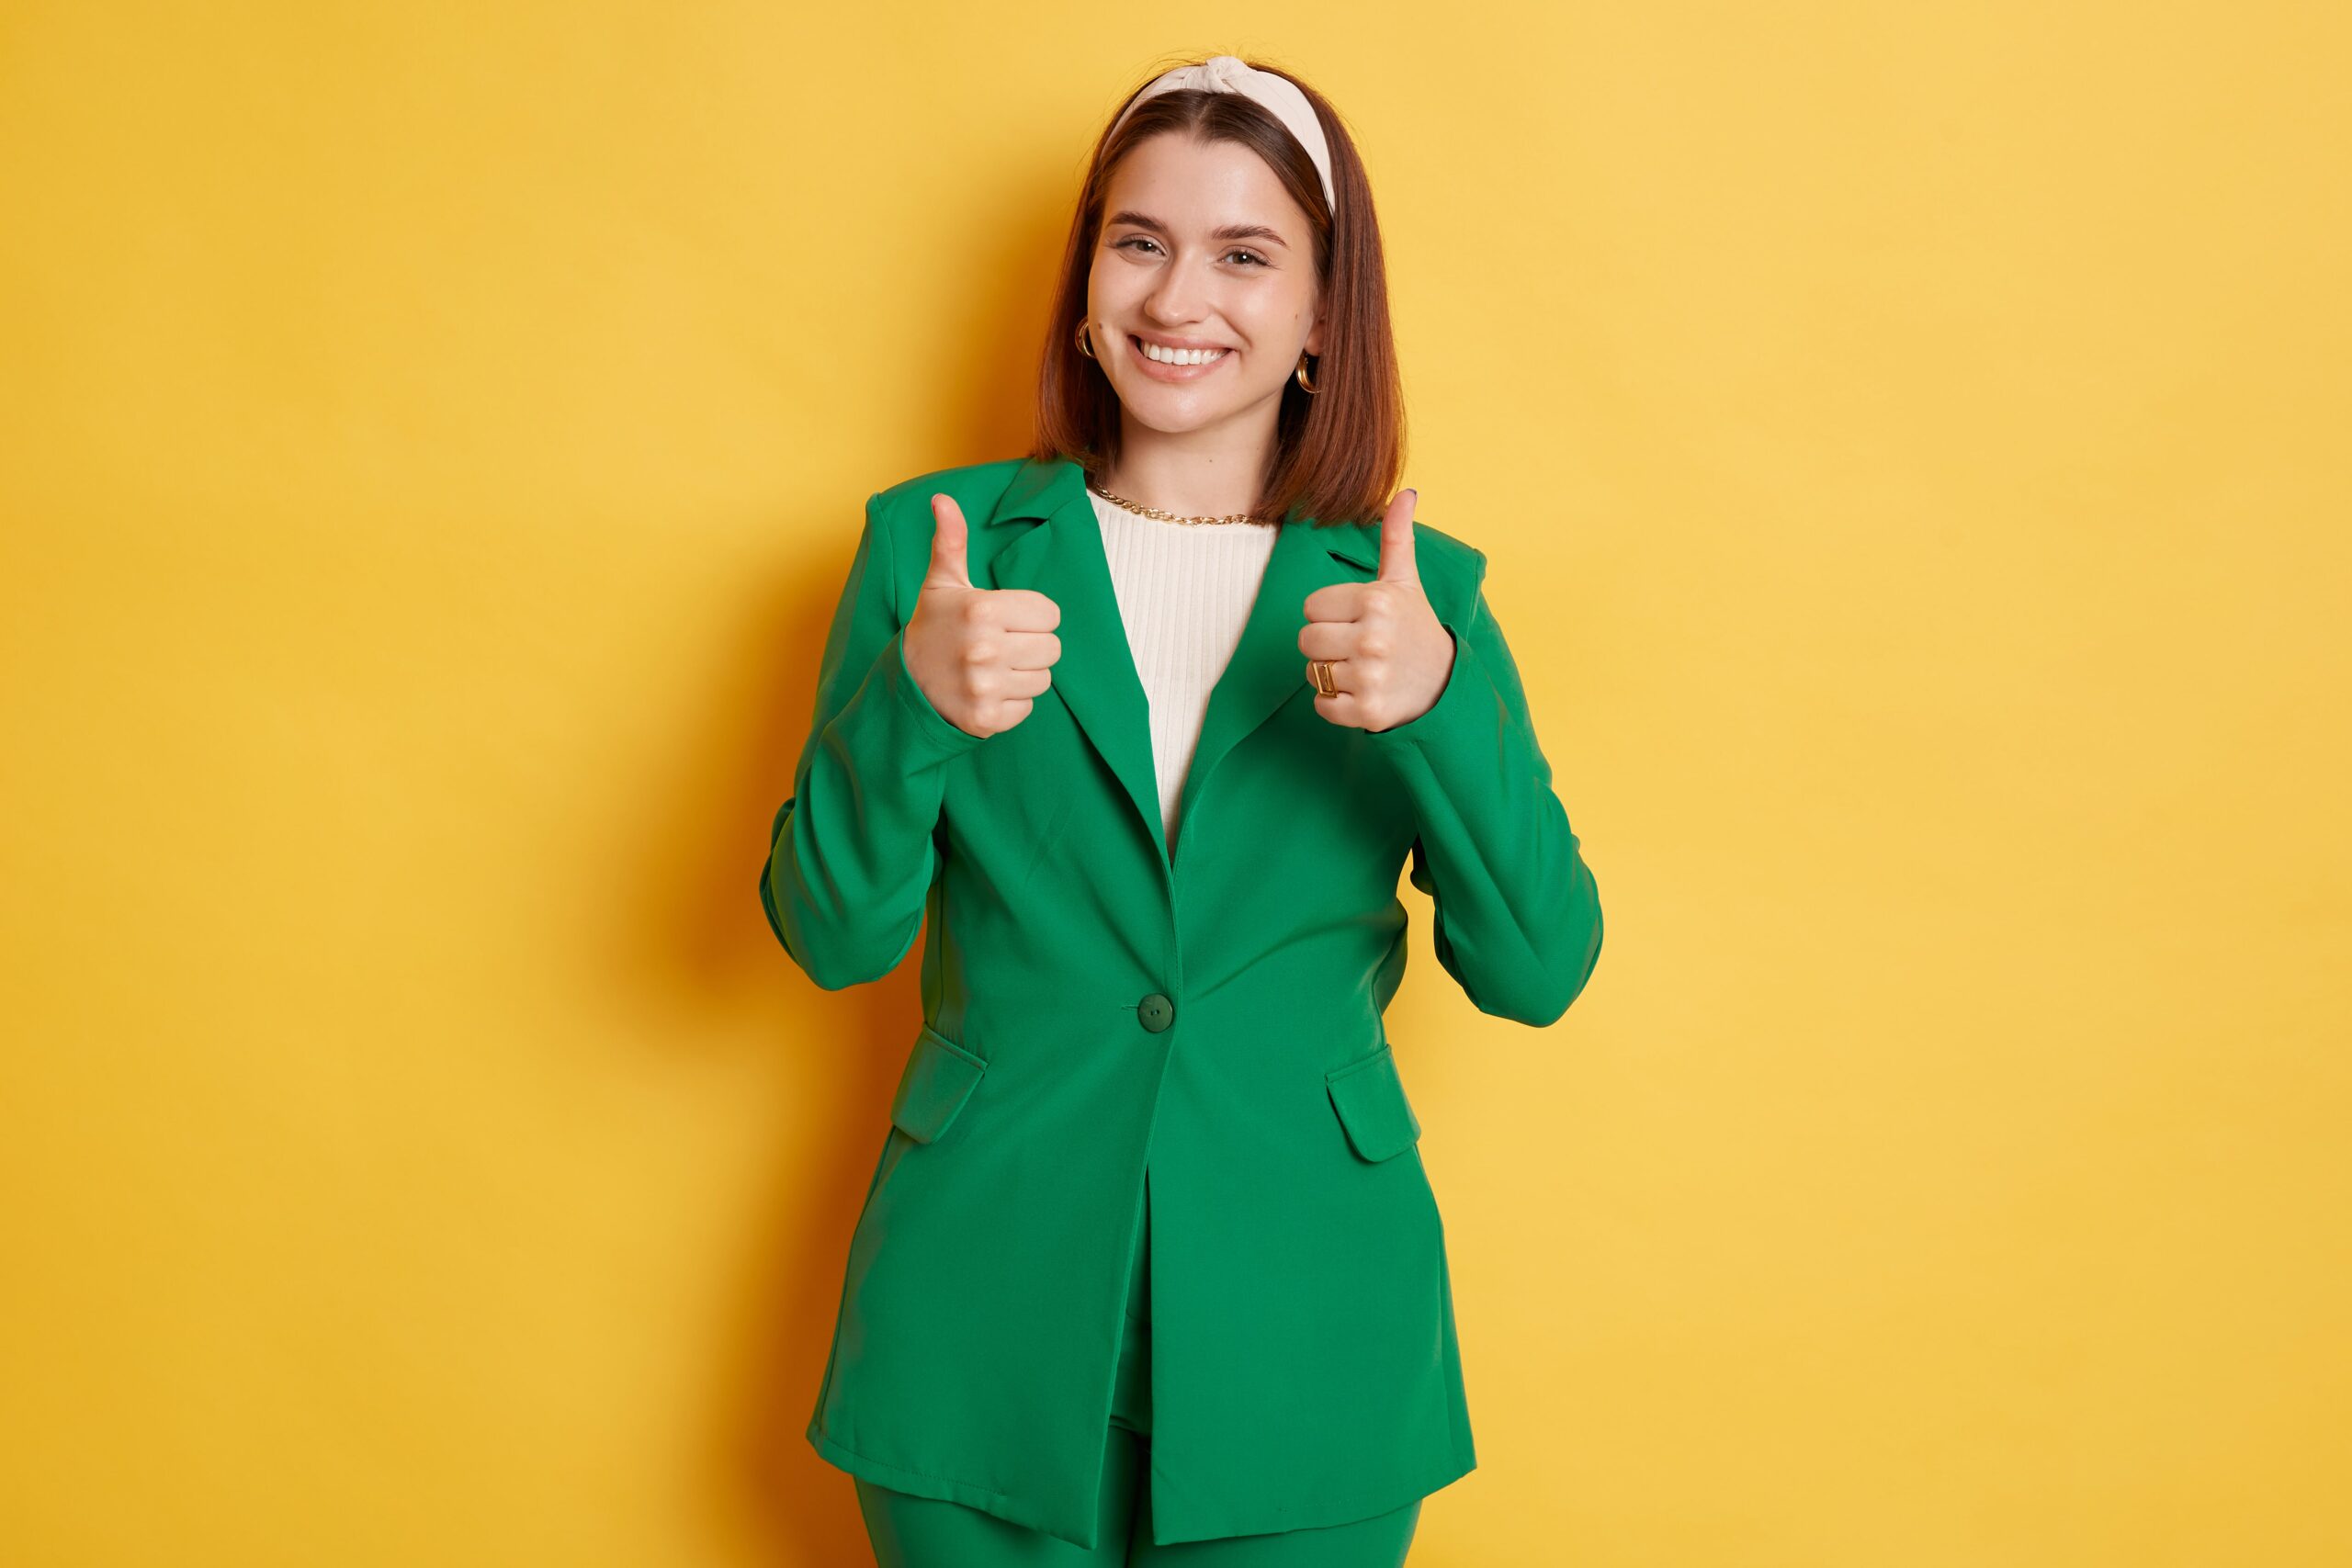 attractive-woman-wearing-green-jacket-standing-isolated-yellow-background-showing-like-gesture-thumb-ups-recommend-approved-sign-min